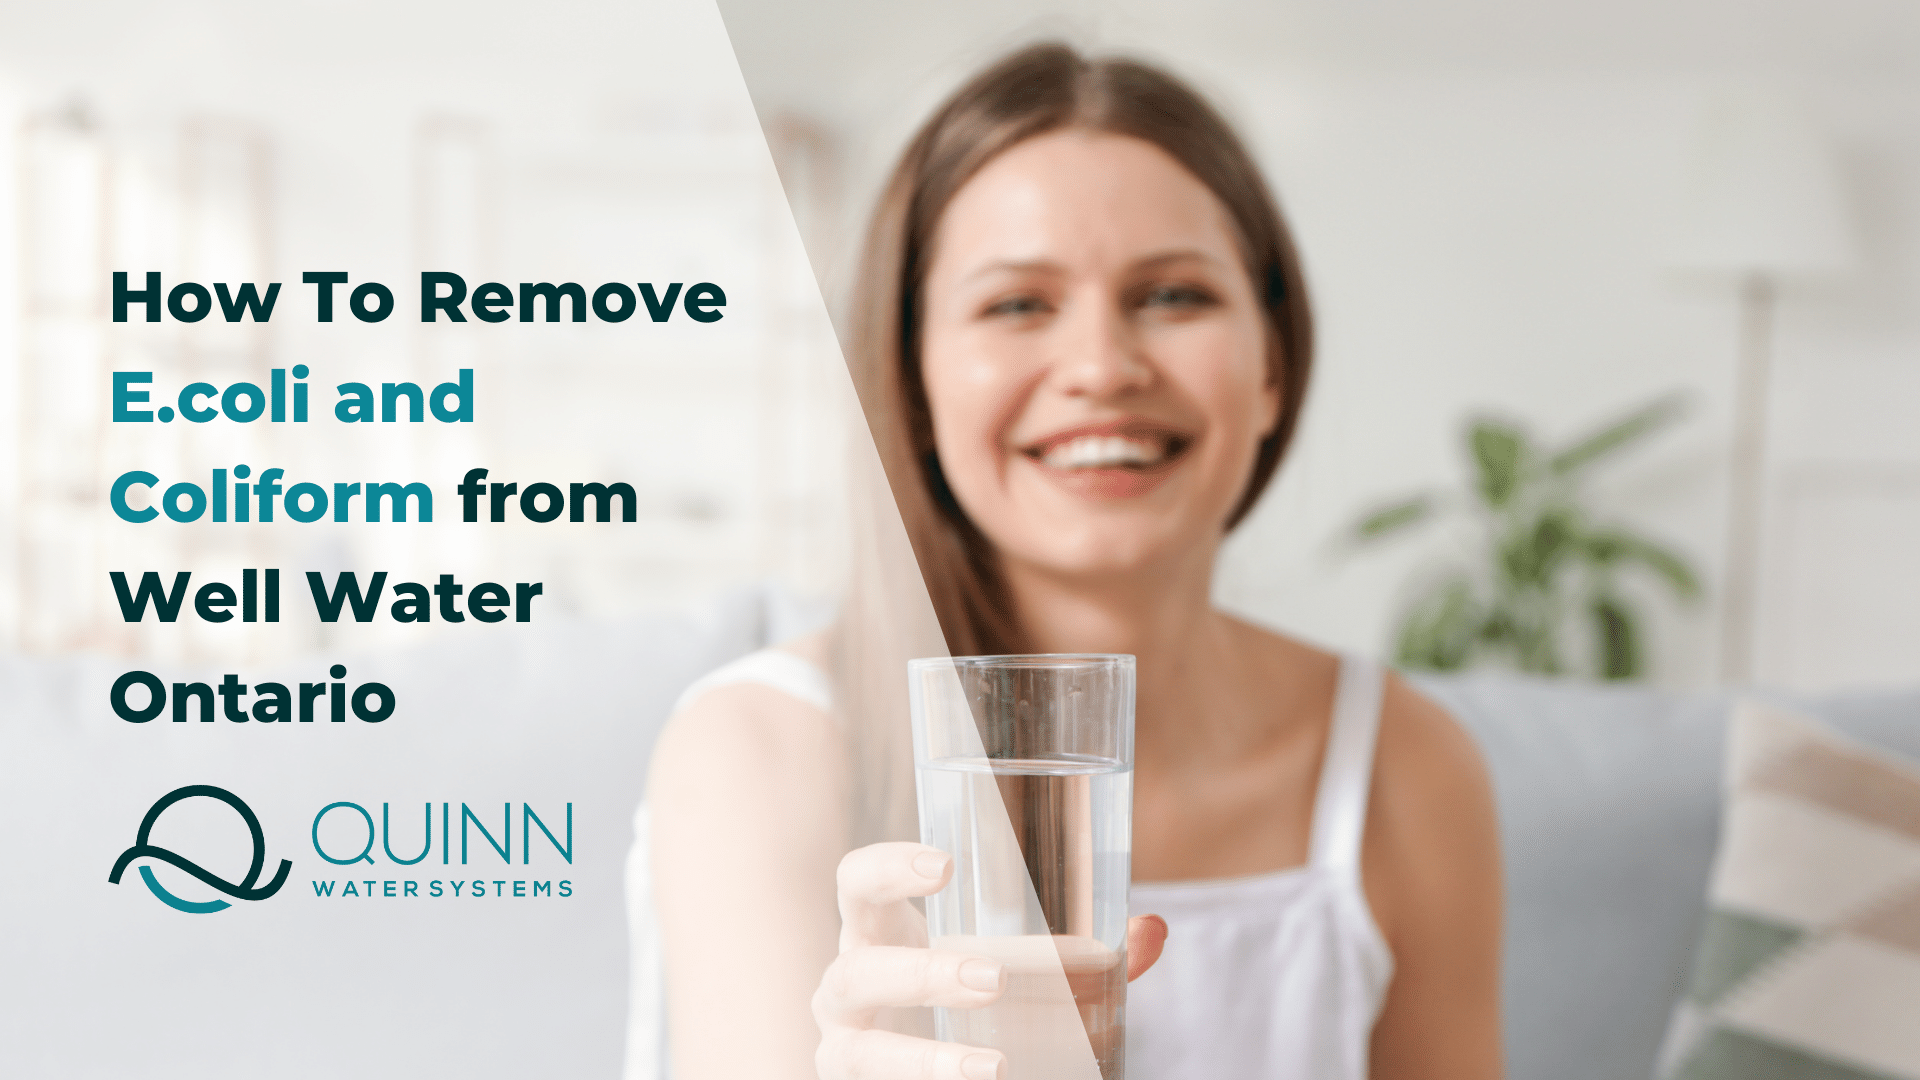 How To Remove E.coli and Coliform from Well Water Ontario